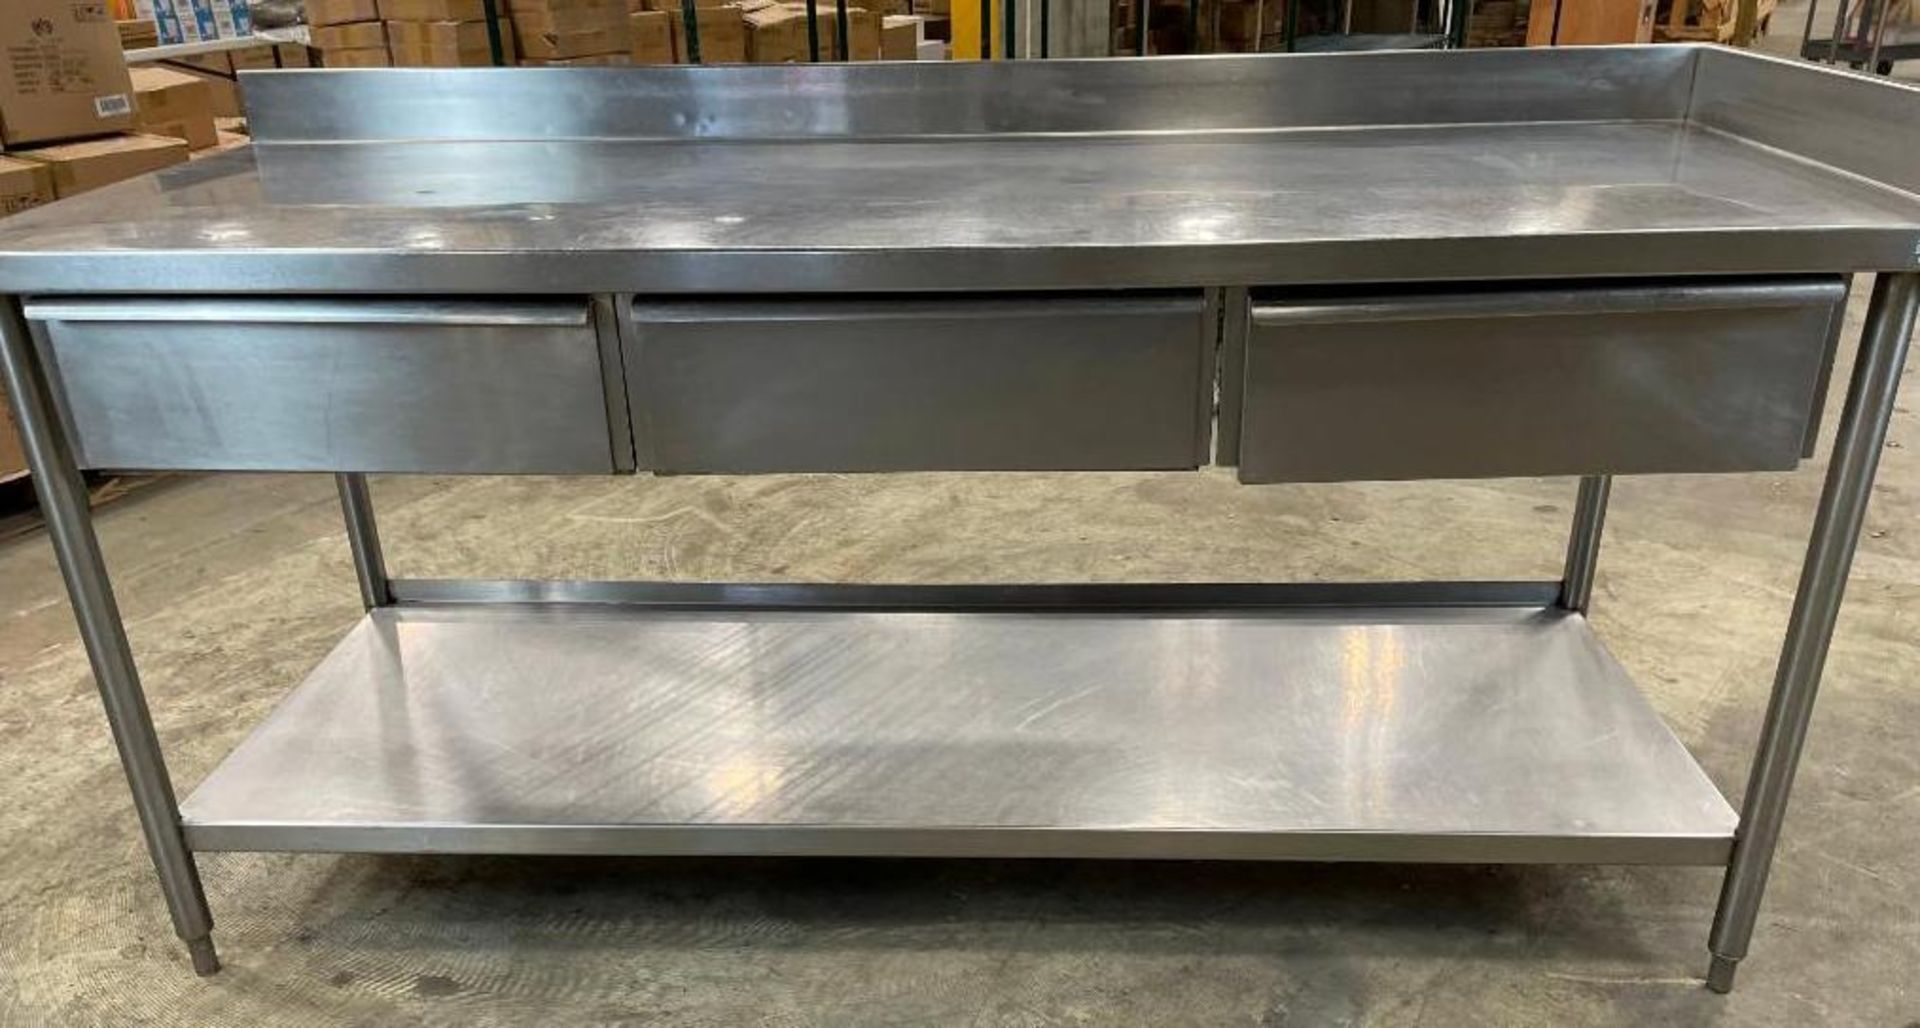 STAINLESS STEEL WORK TABLE WITH 3 DRAWERS AND UNDERSHELF - Image 8 of 11